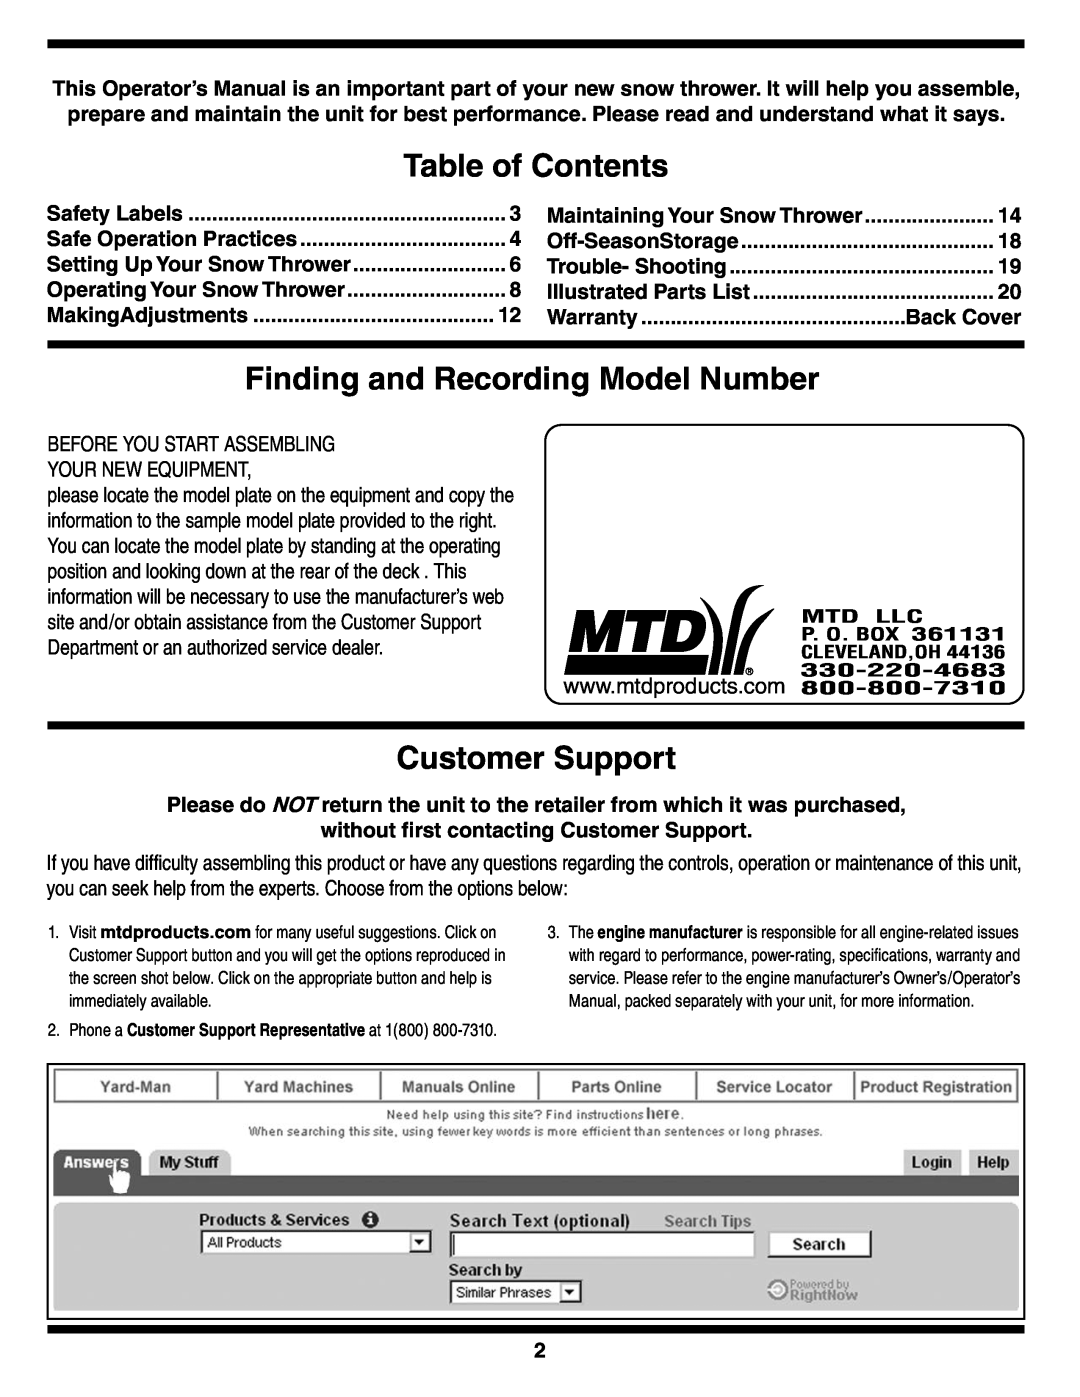 MTD 769-01275D Table of Contents, Finding and Recording Model Number, Customer Support, Maintaining Your Snow Thrower 